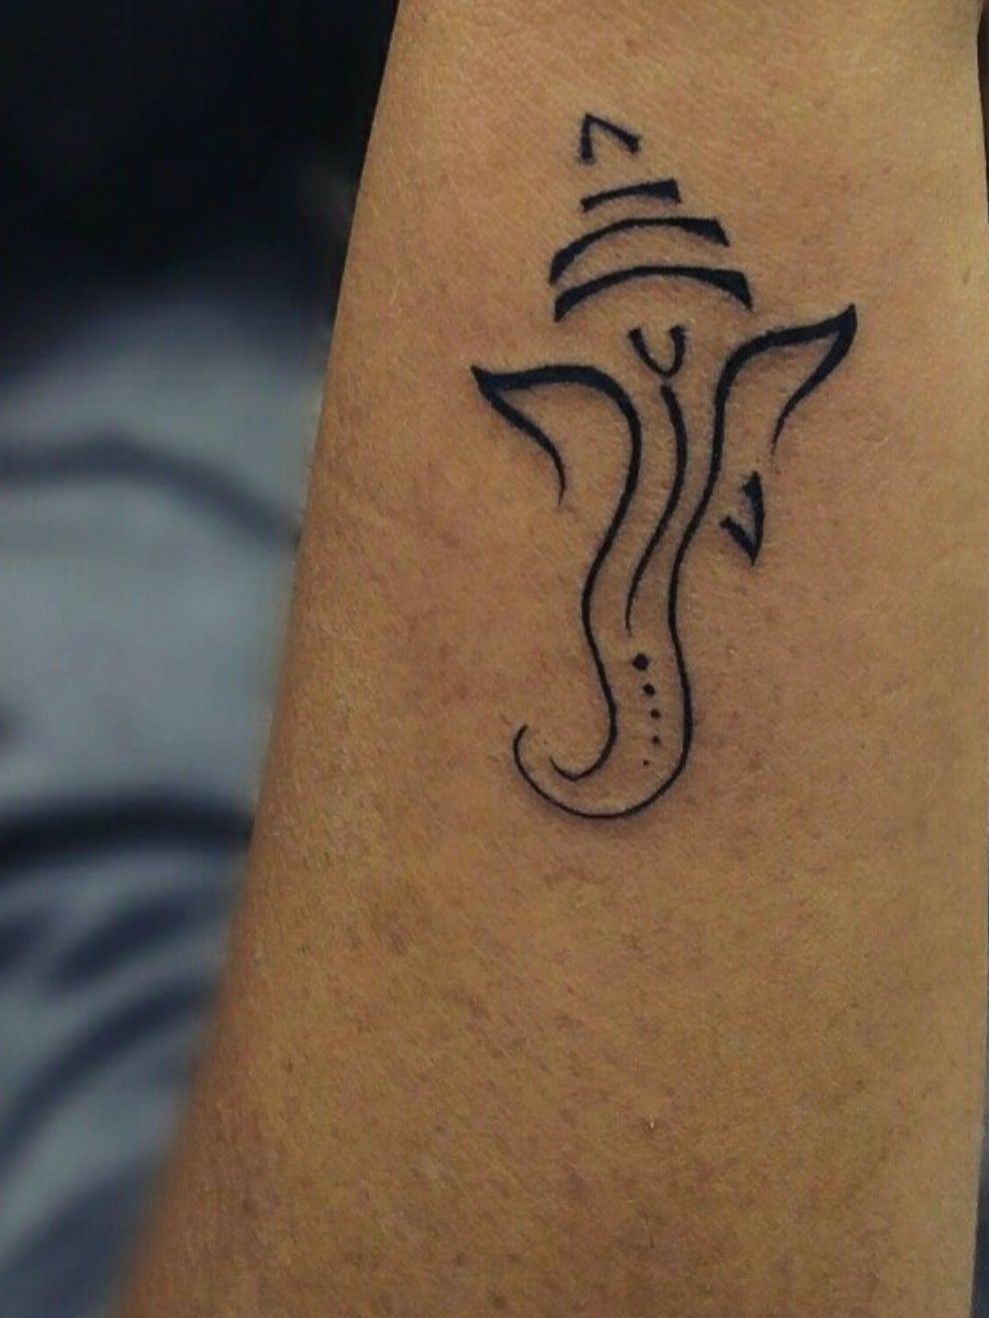 15+ Best Lord Ganesh Tattoo Designs For Men and Women